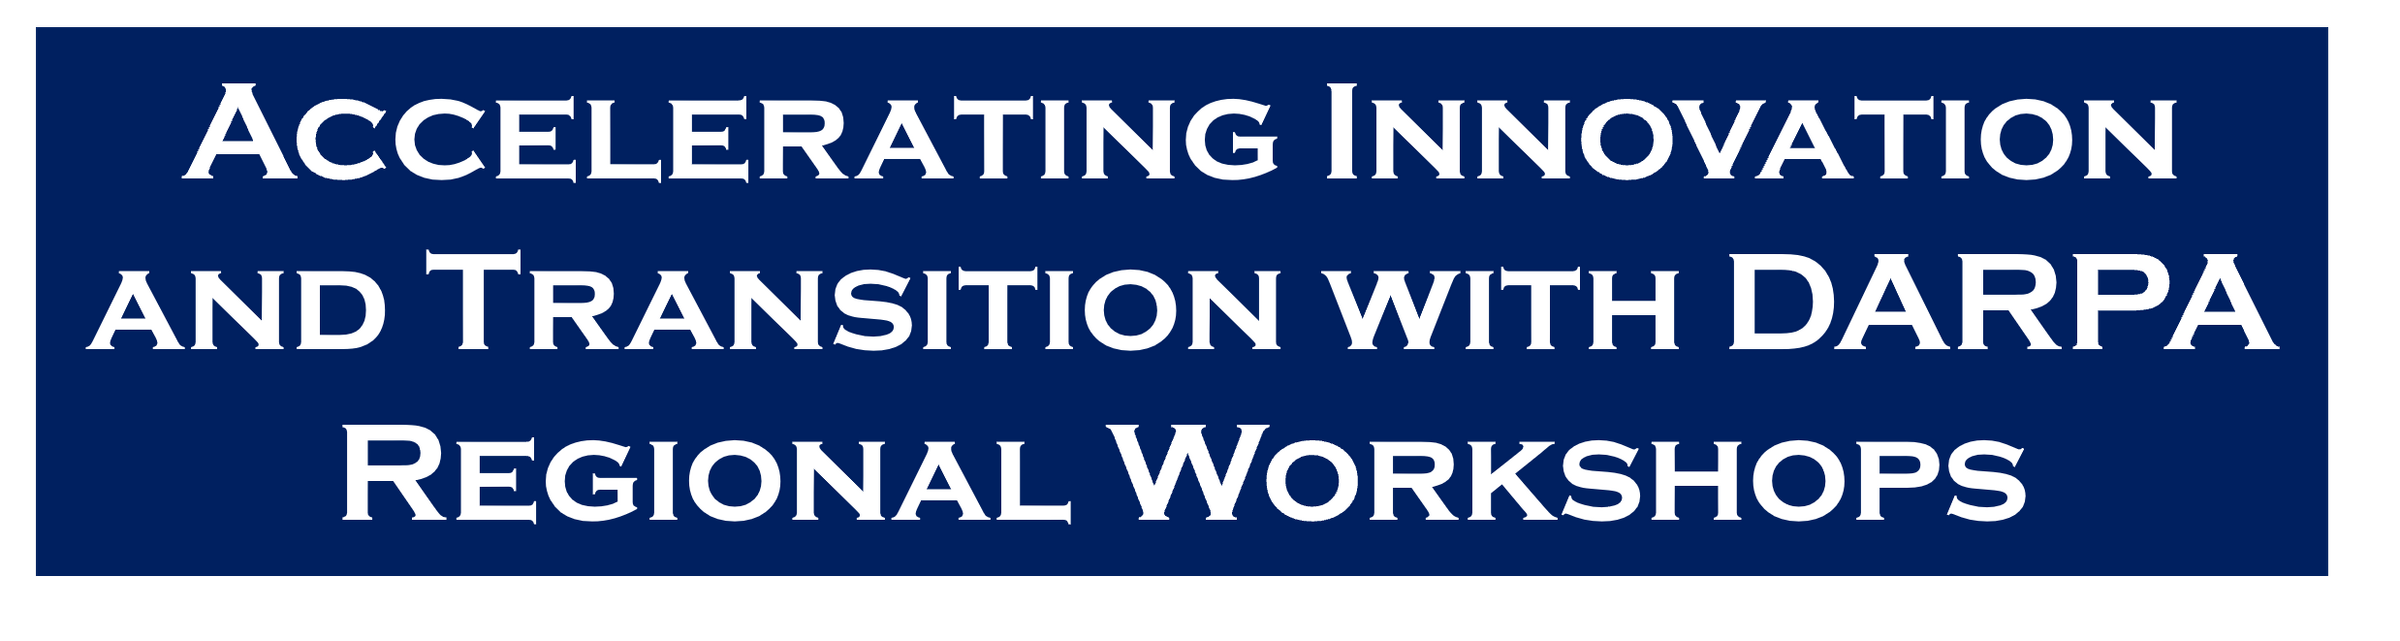 Accelerating Innovation and Transition with DARPA Regional Workshop